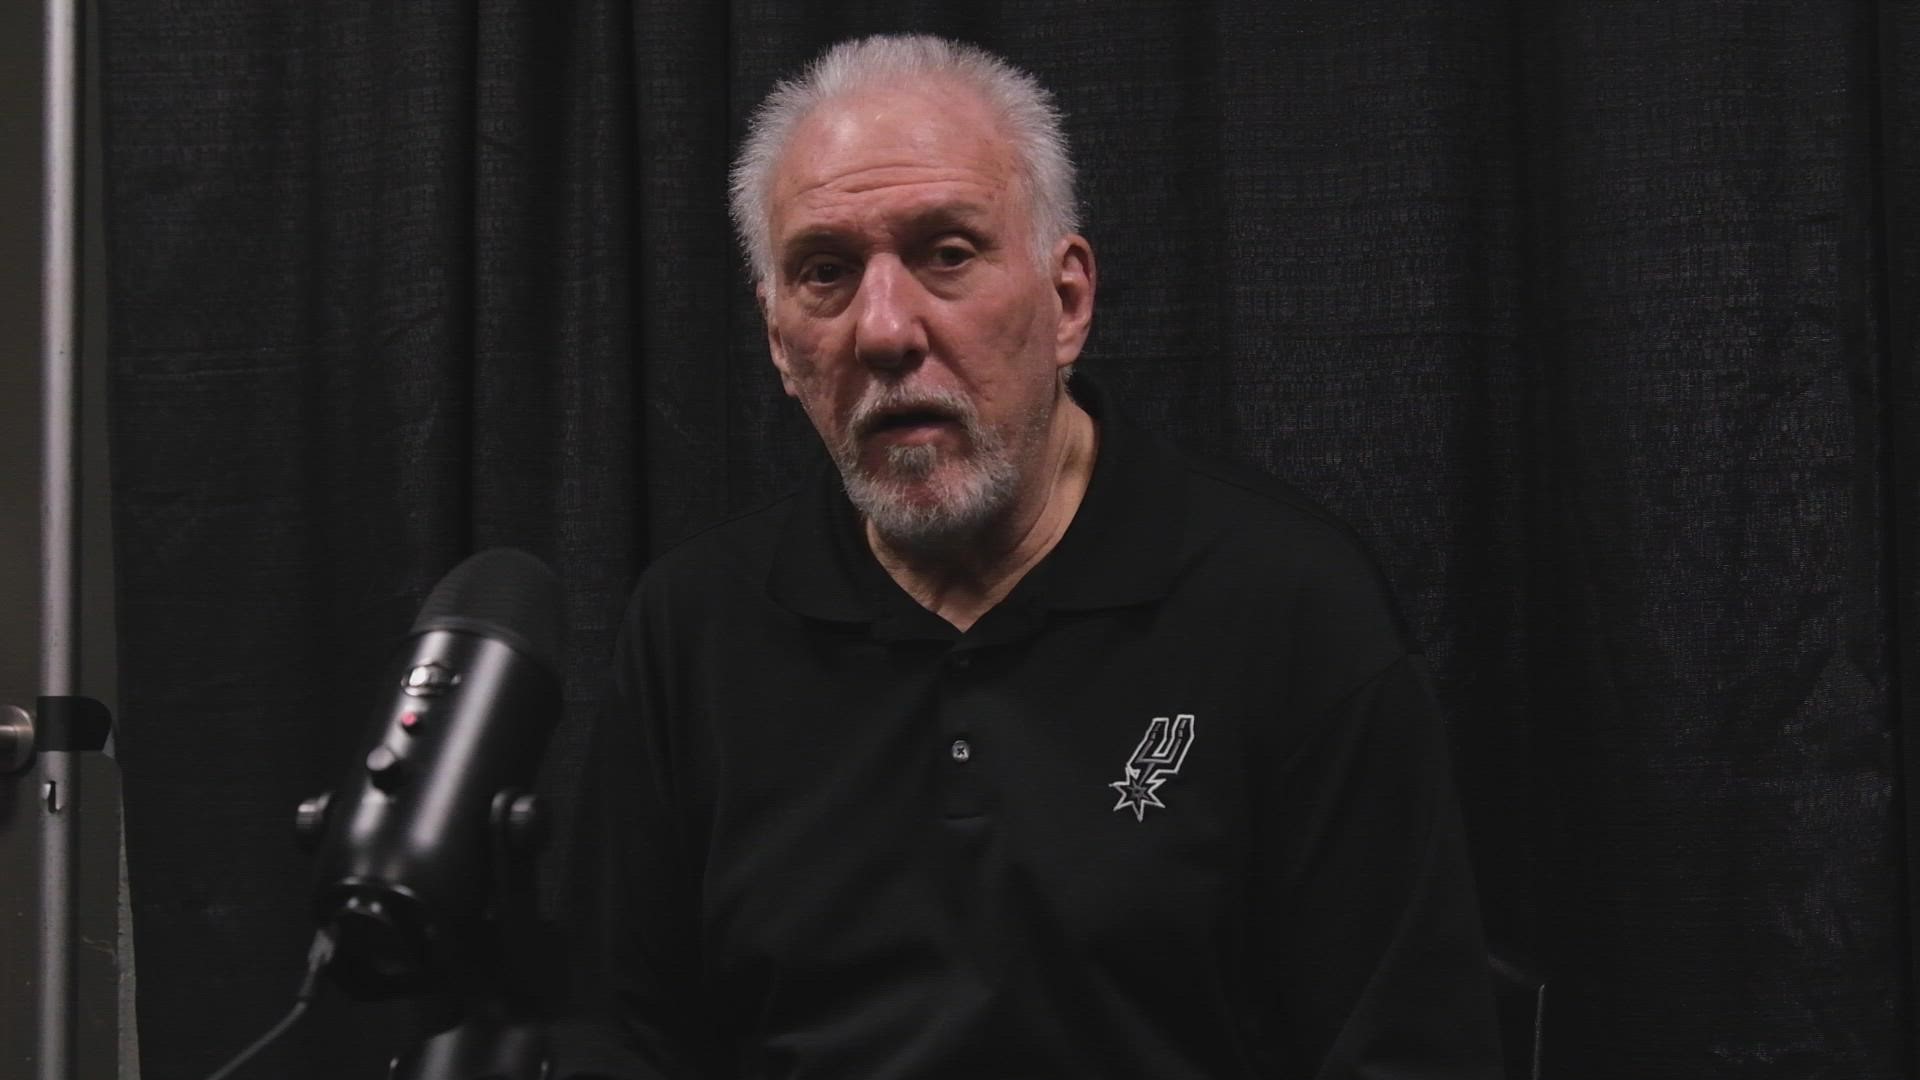 Pop said the young Spurs are still figuring out the ends of quarters, and they're learning to be more solid in those situations.